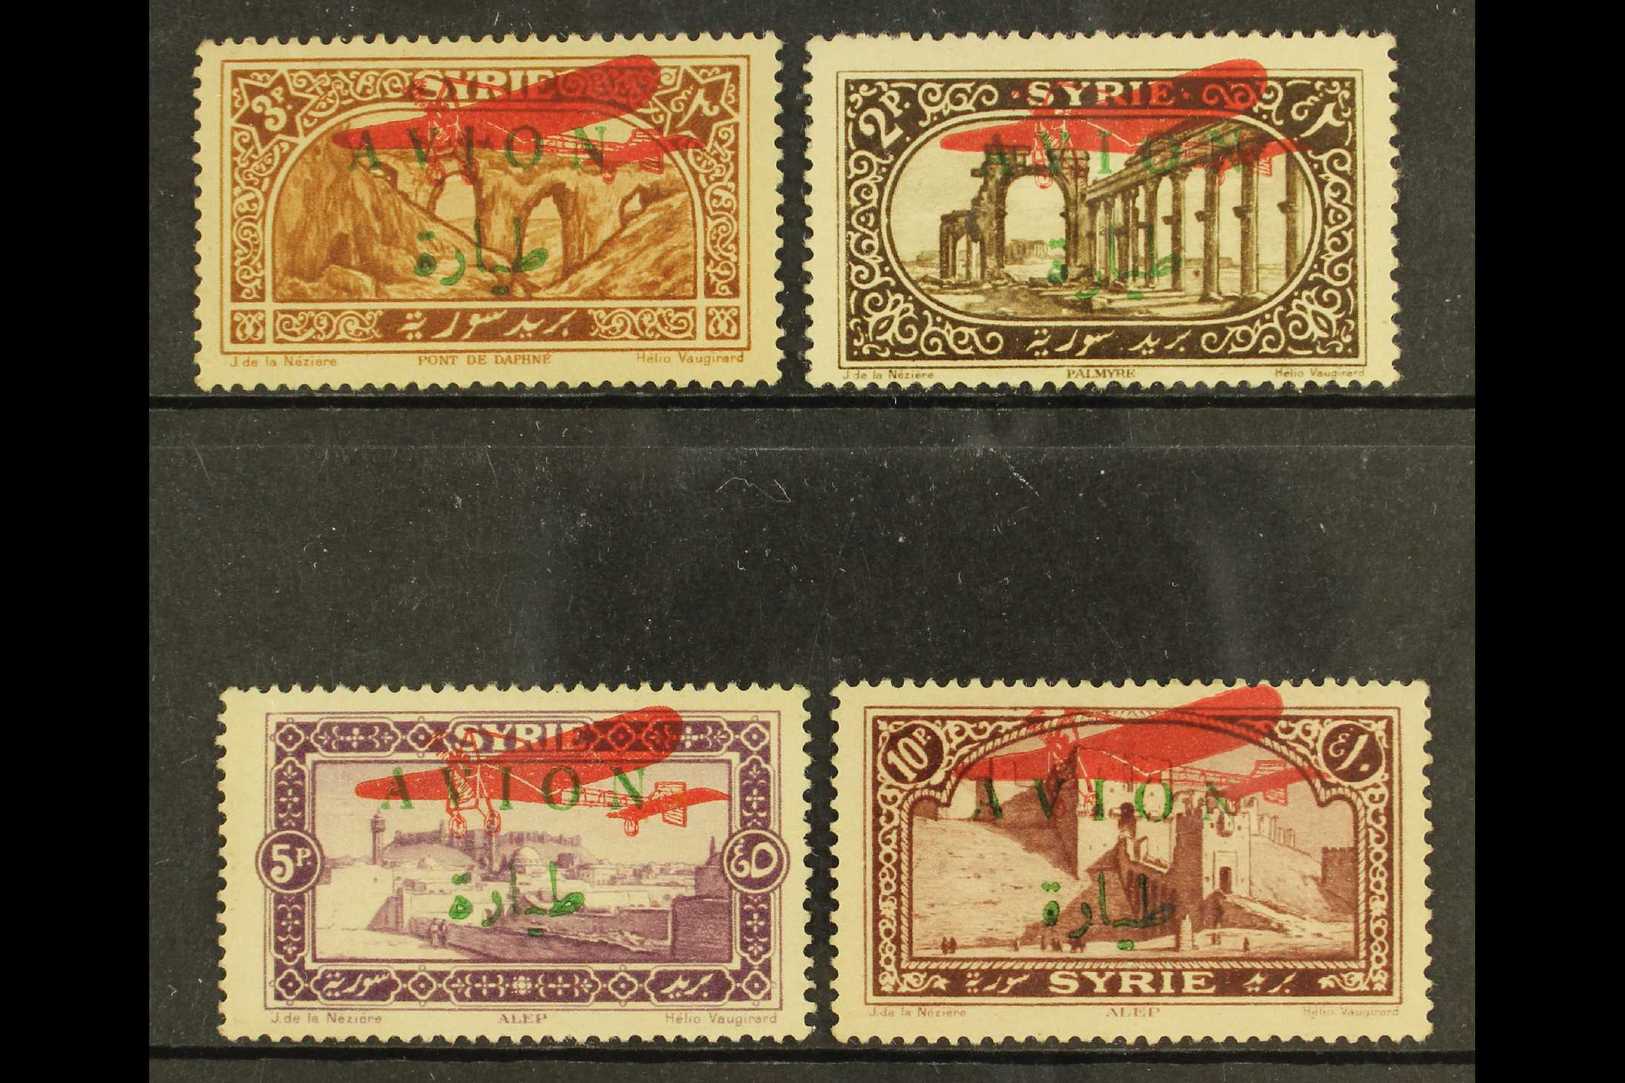 1925 AIRS WITH 1926 OVERPRINTS.  1925 Complete Set With "AVION" Opt In Green, With Additional 1926 Aeroplane Opt In Red, - Siria